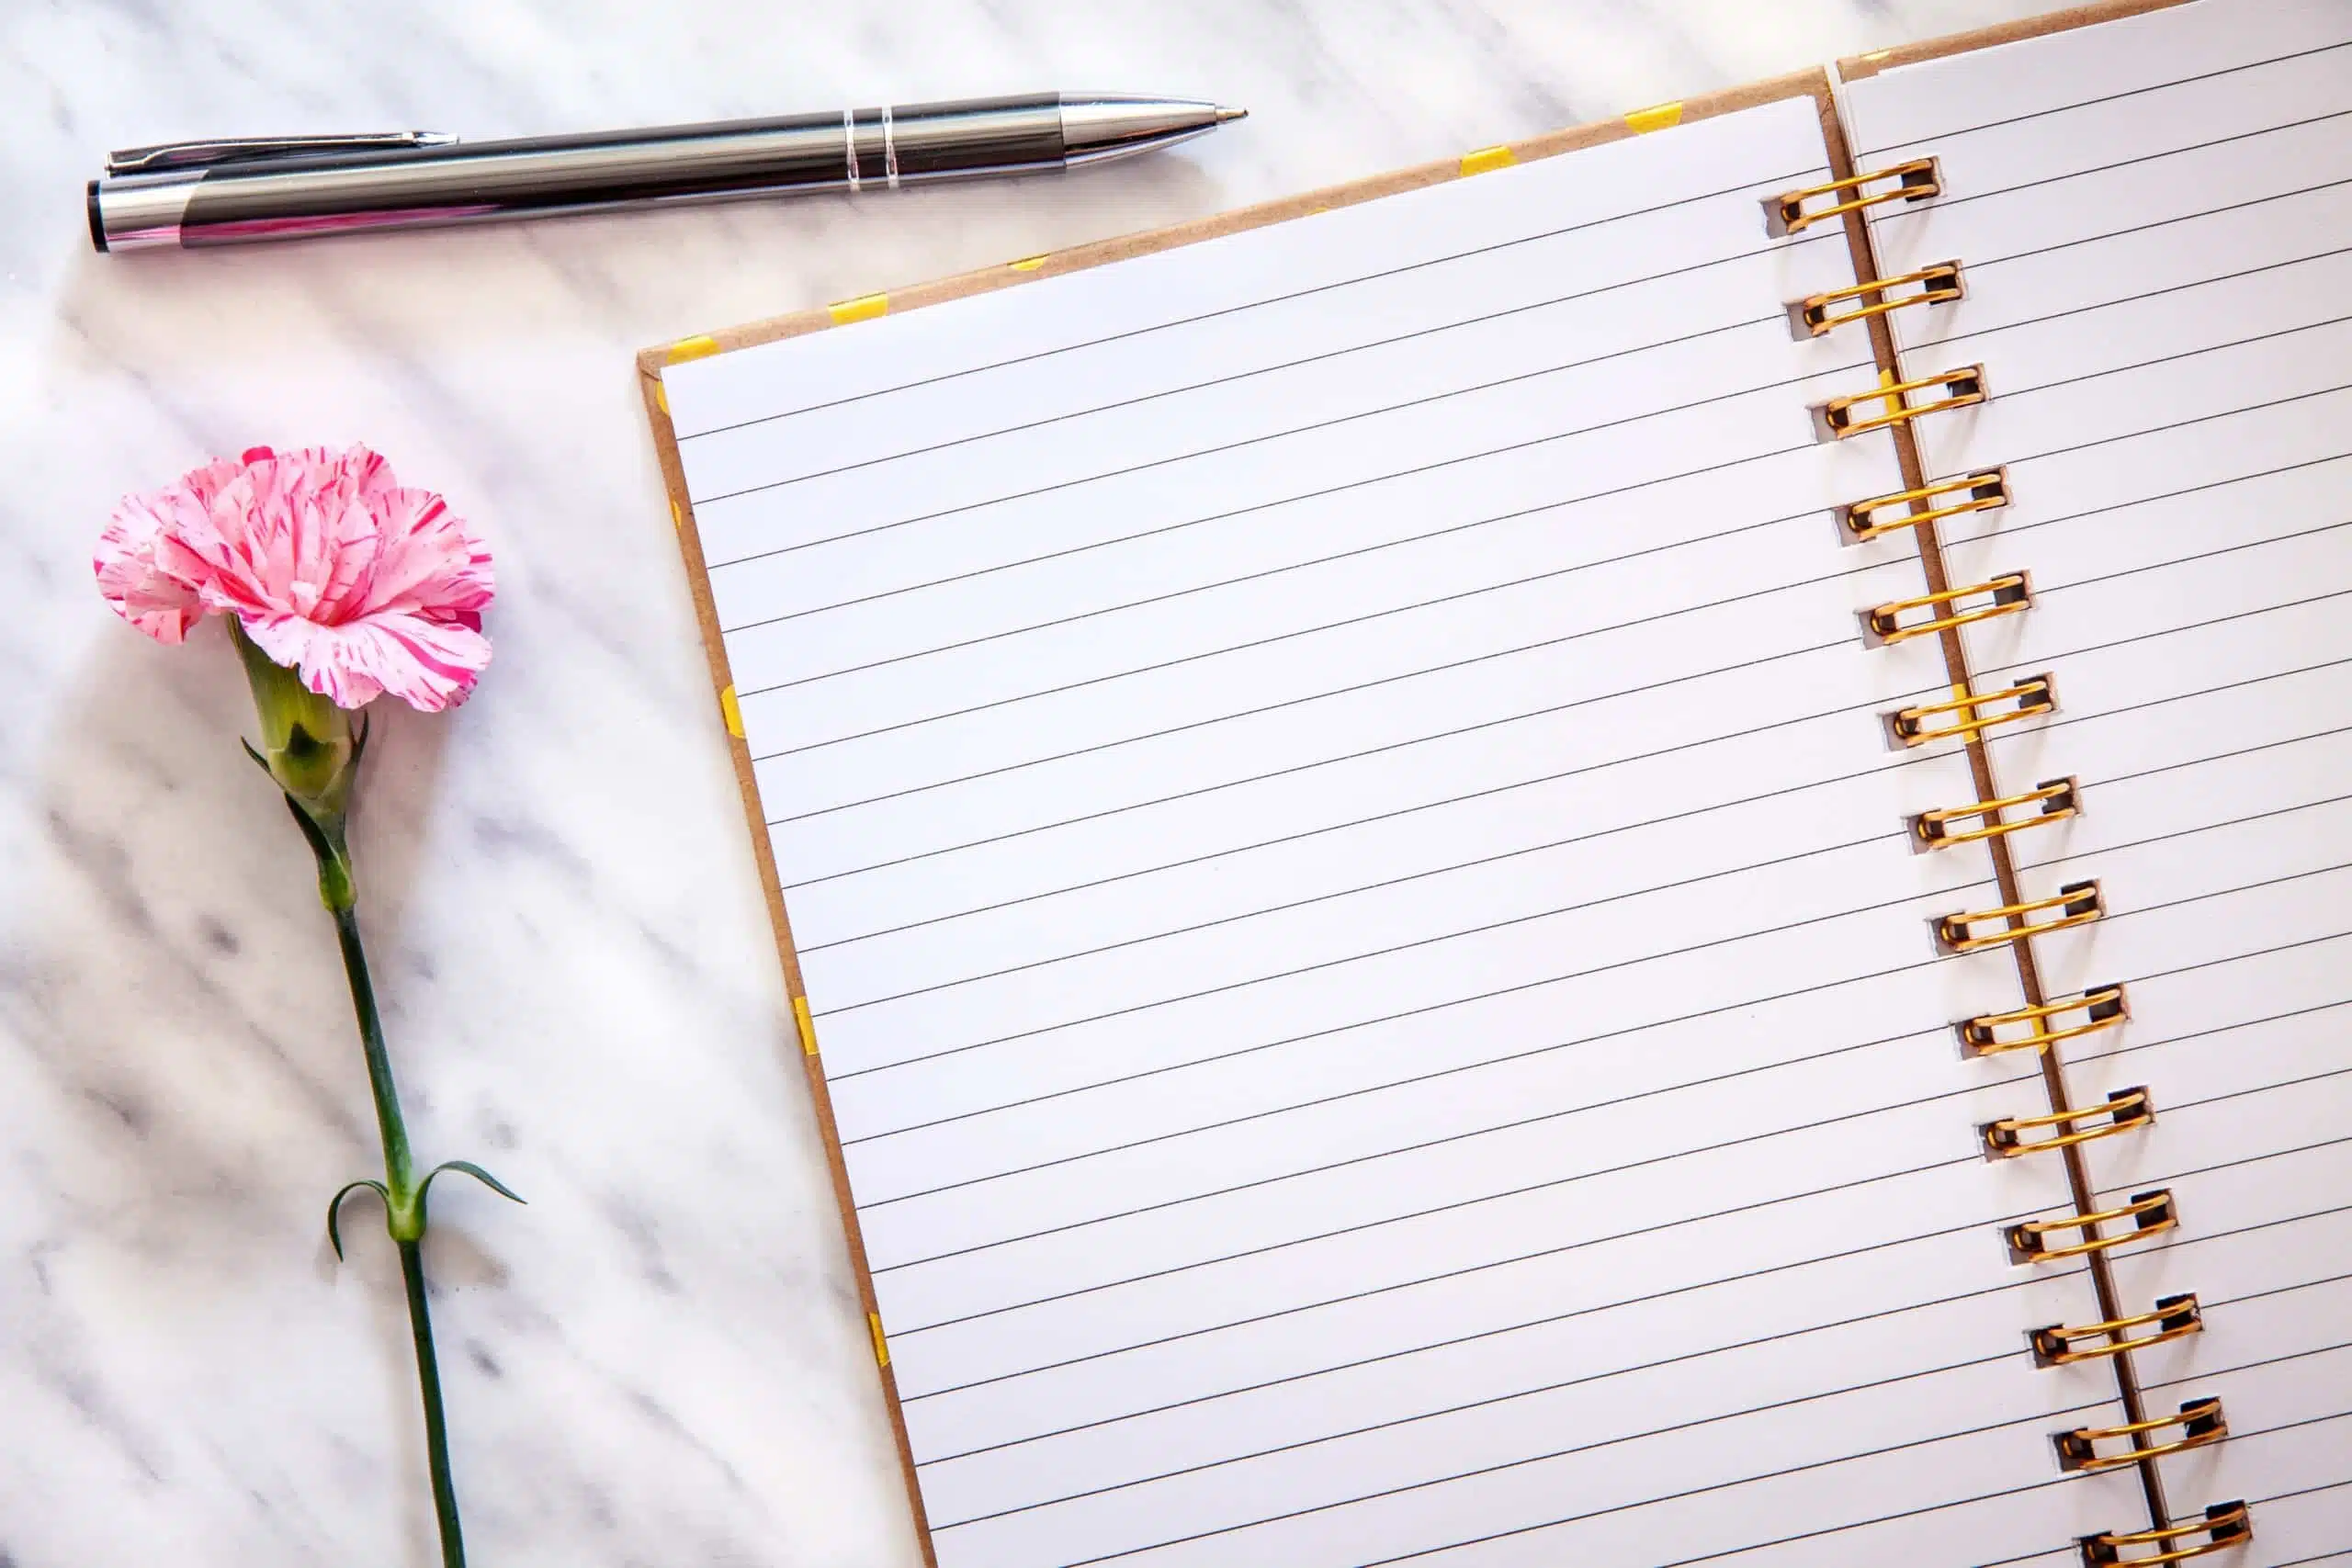 A marble desk with an open lined notebook, a pen, and a pink carnation flower.